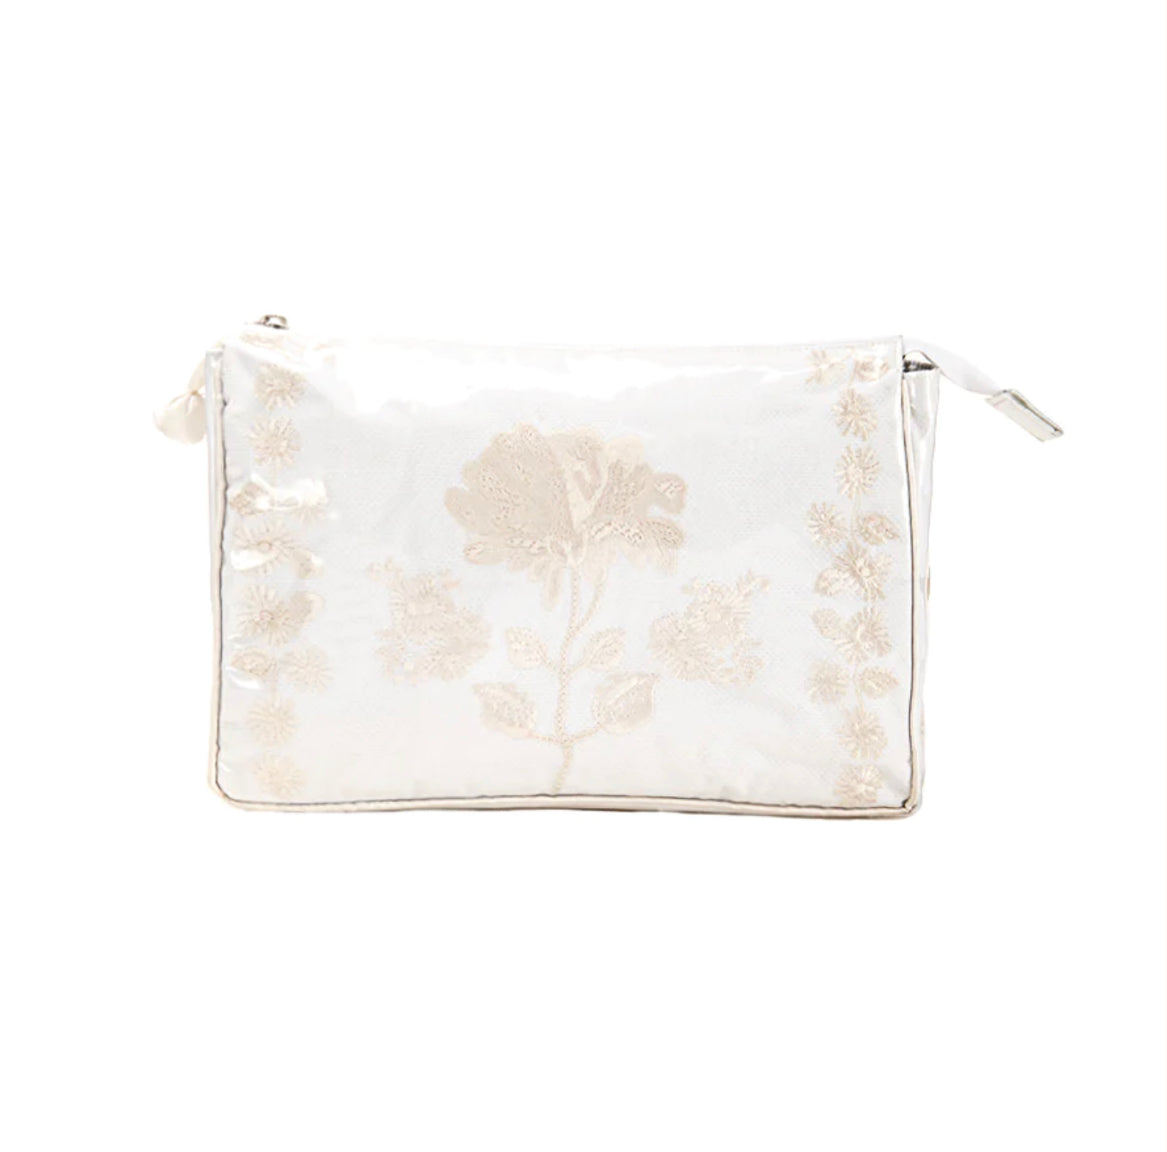 Embroidered Pique Makeup Bag with Ivory Satin Trim